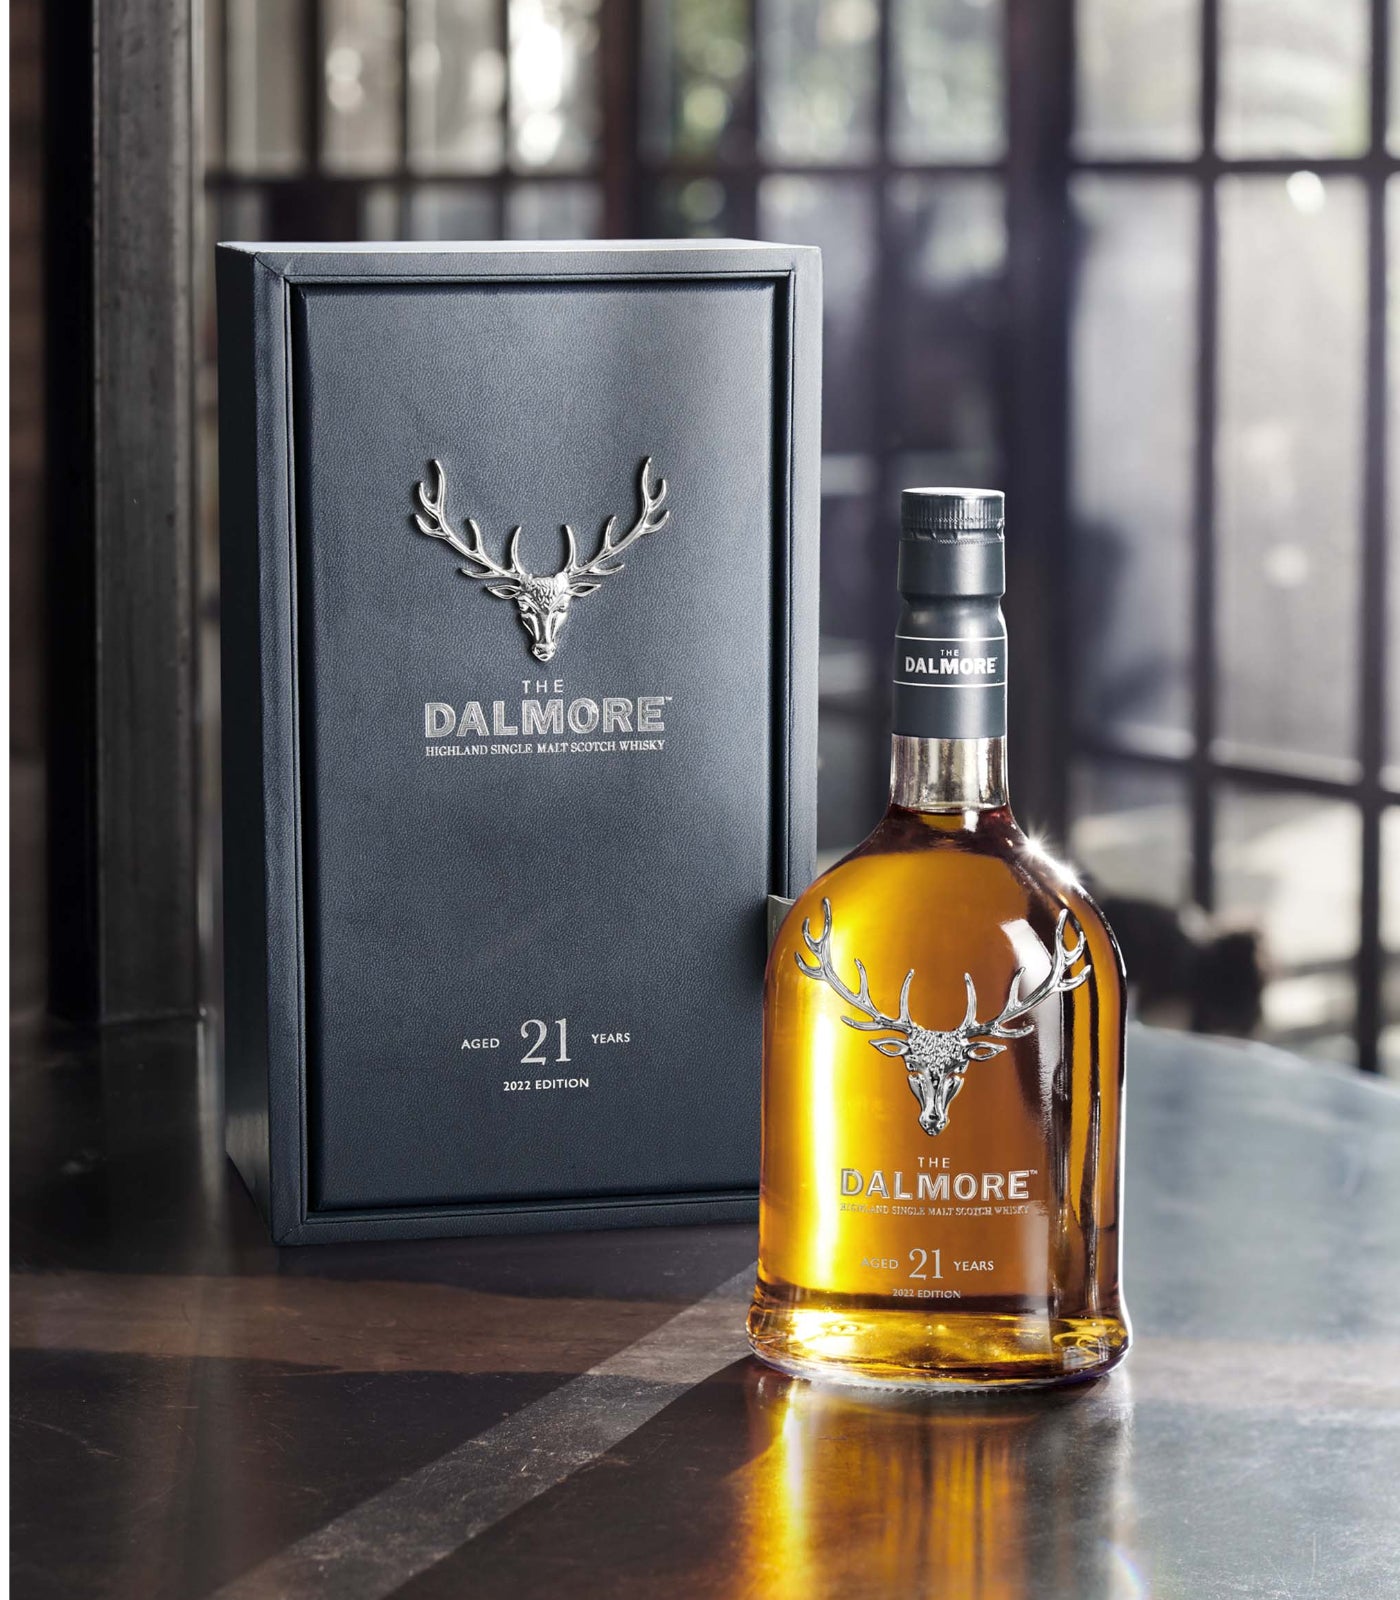 Dalmore 21 Year Old (2022 Edition) Whisky (70cl; 43.8%)